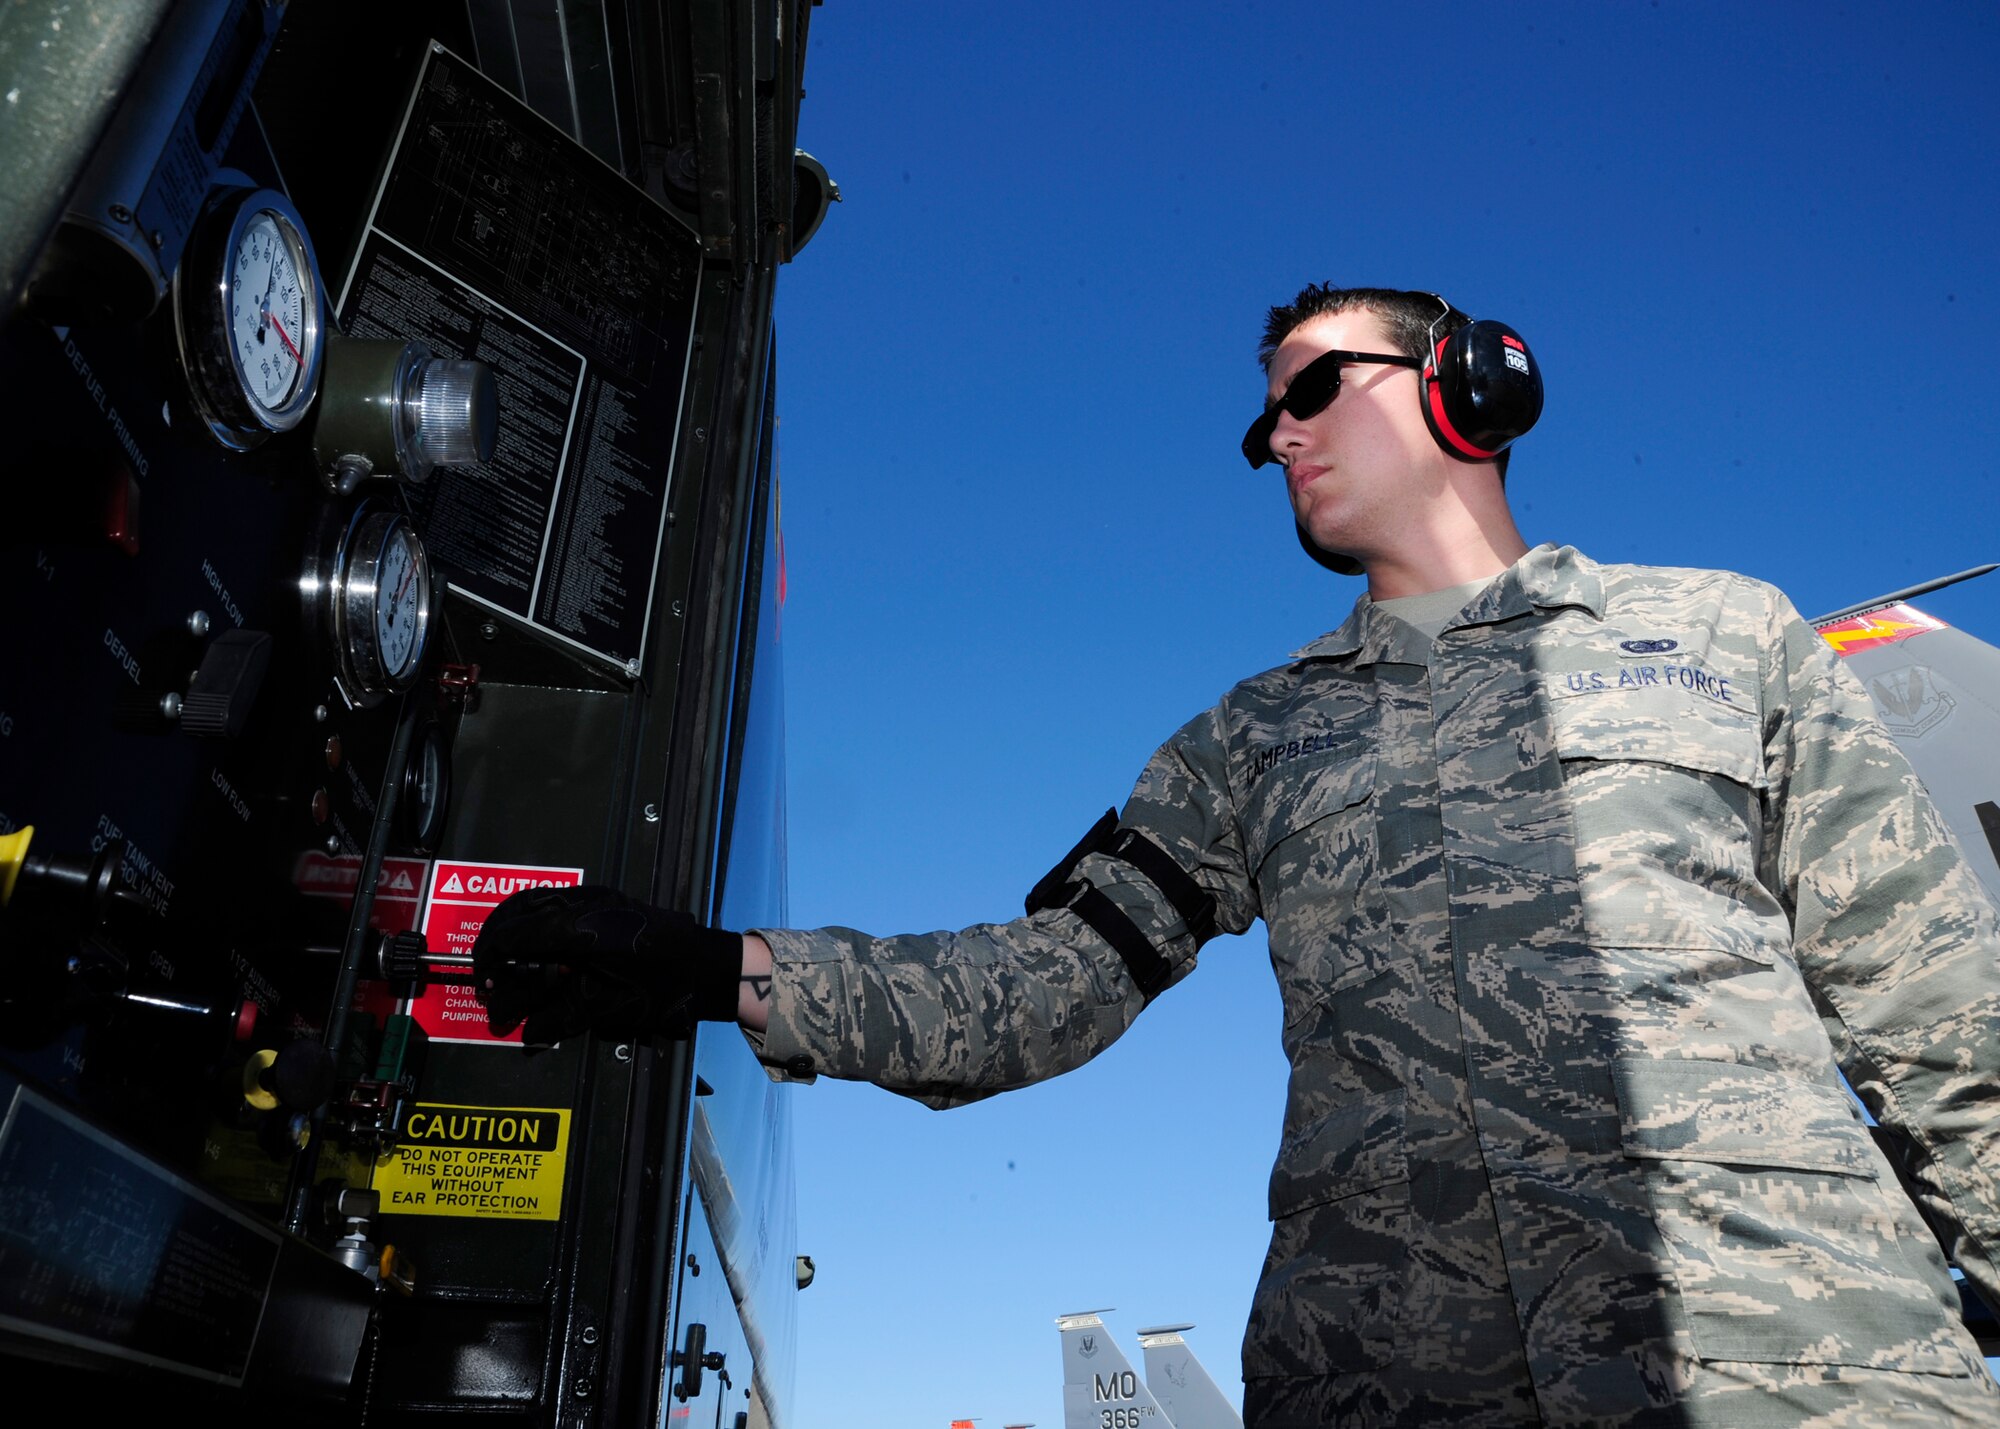 Senior Airman Shawn Campbell, 325th Logistics Readiness Squadron fuels specialist, prepares an R-11 refueler, Jan. 28, before refilling an aircraft on the flightline. The Fuels Management Flight provides superior fuel support to the 325th Fighter Wing. Men and women from this section provide petroleum products to more than 50 assigned aircraft, 641 wing vehicles and 100 organizational tanks and generators. (U.S. Air Force photo by Senior Airman Solomon Cook/ Released)